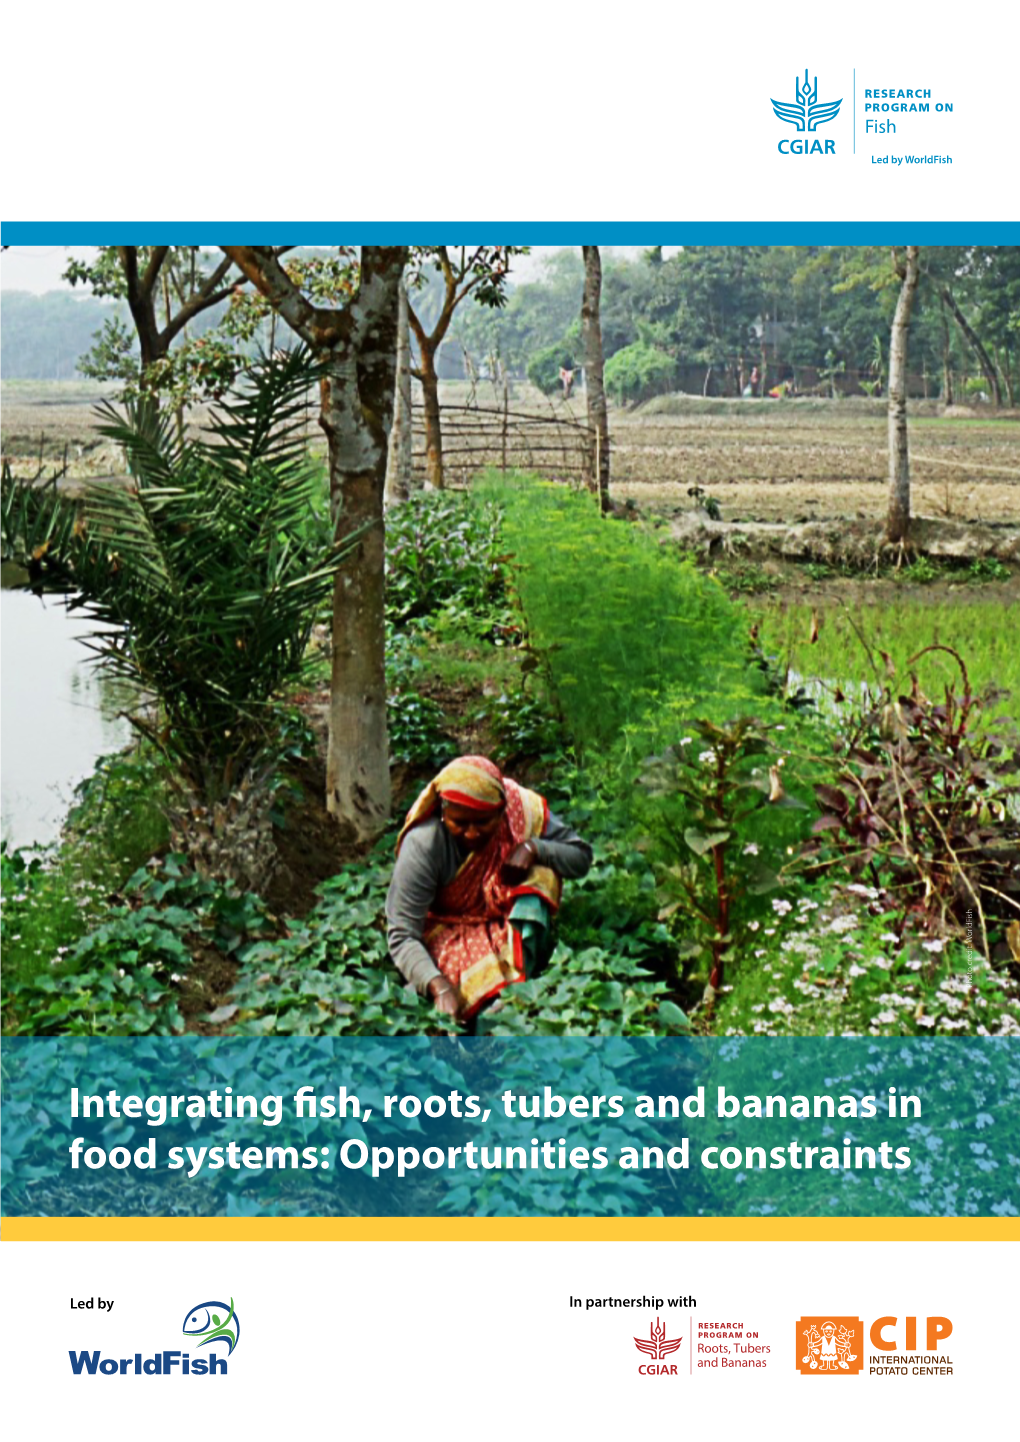 Integrating Fish, Roots, Tubers and Bananas in Food Systems: Opportunities and Constraints